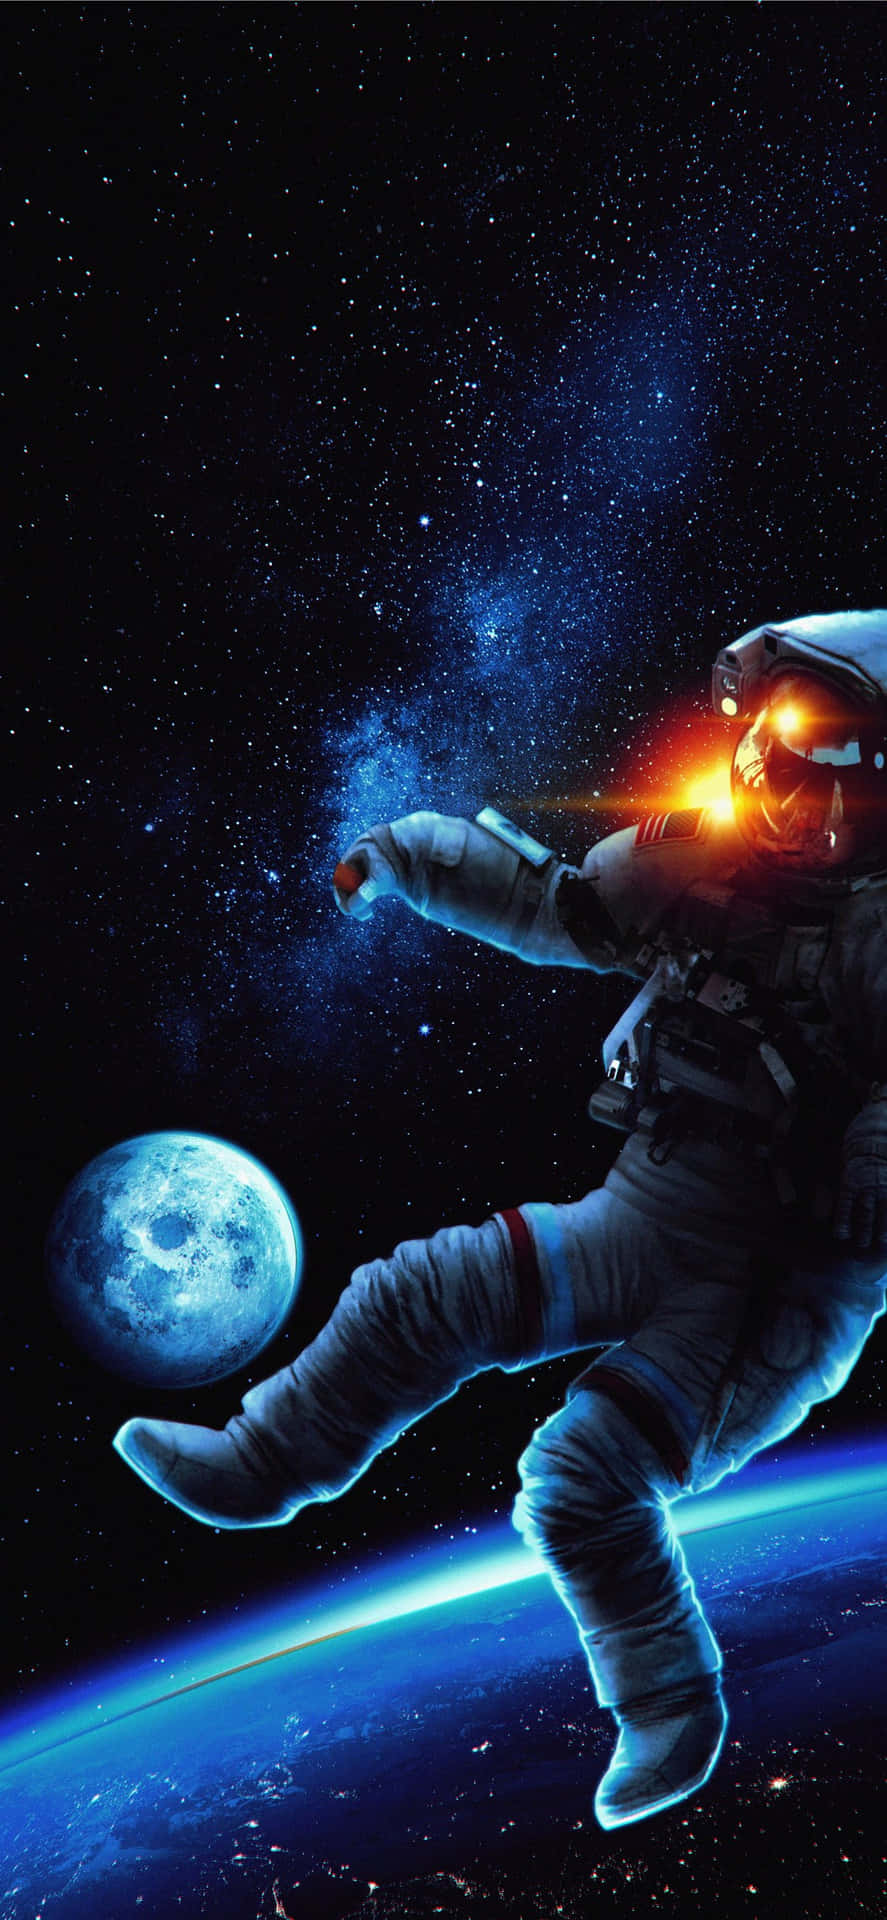 An astronaut showcases their bravery, courage and ambition in space Wallpaper